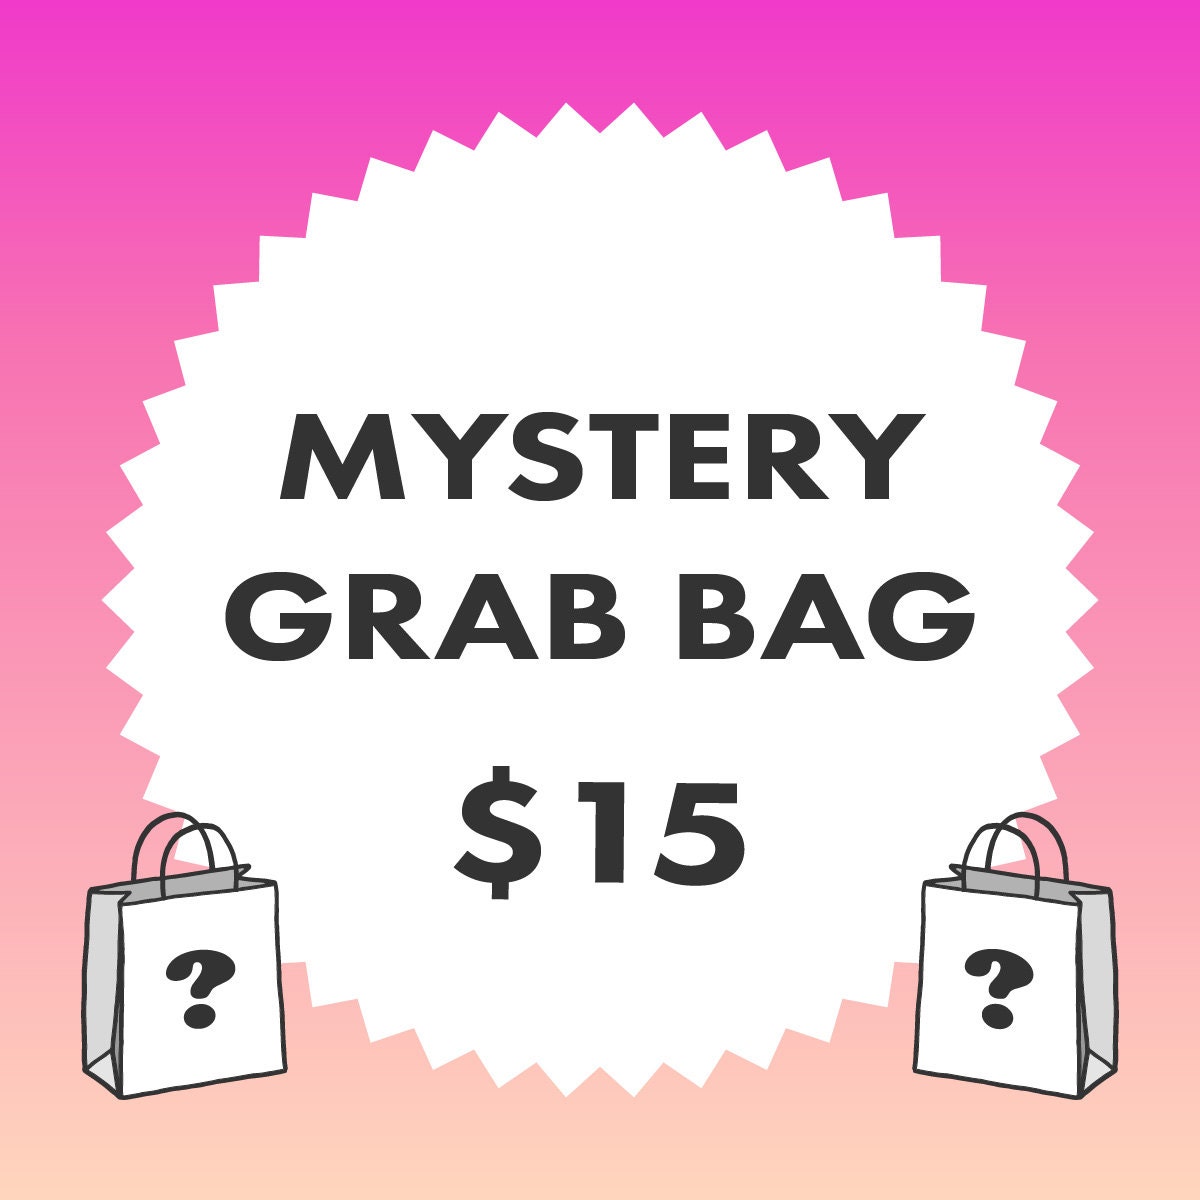 MYSTERY GRAB BAG Stamps Papercraft Only Up to 60% Off